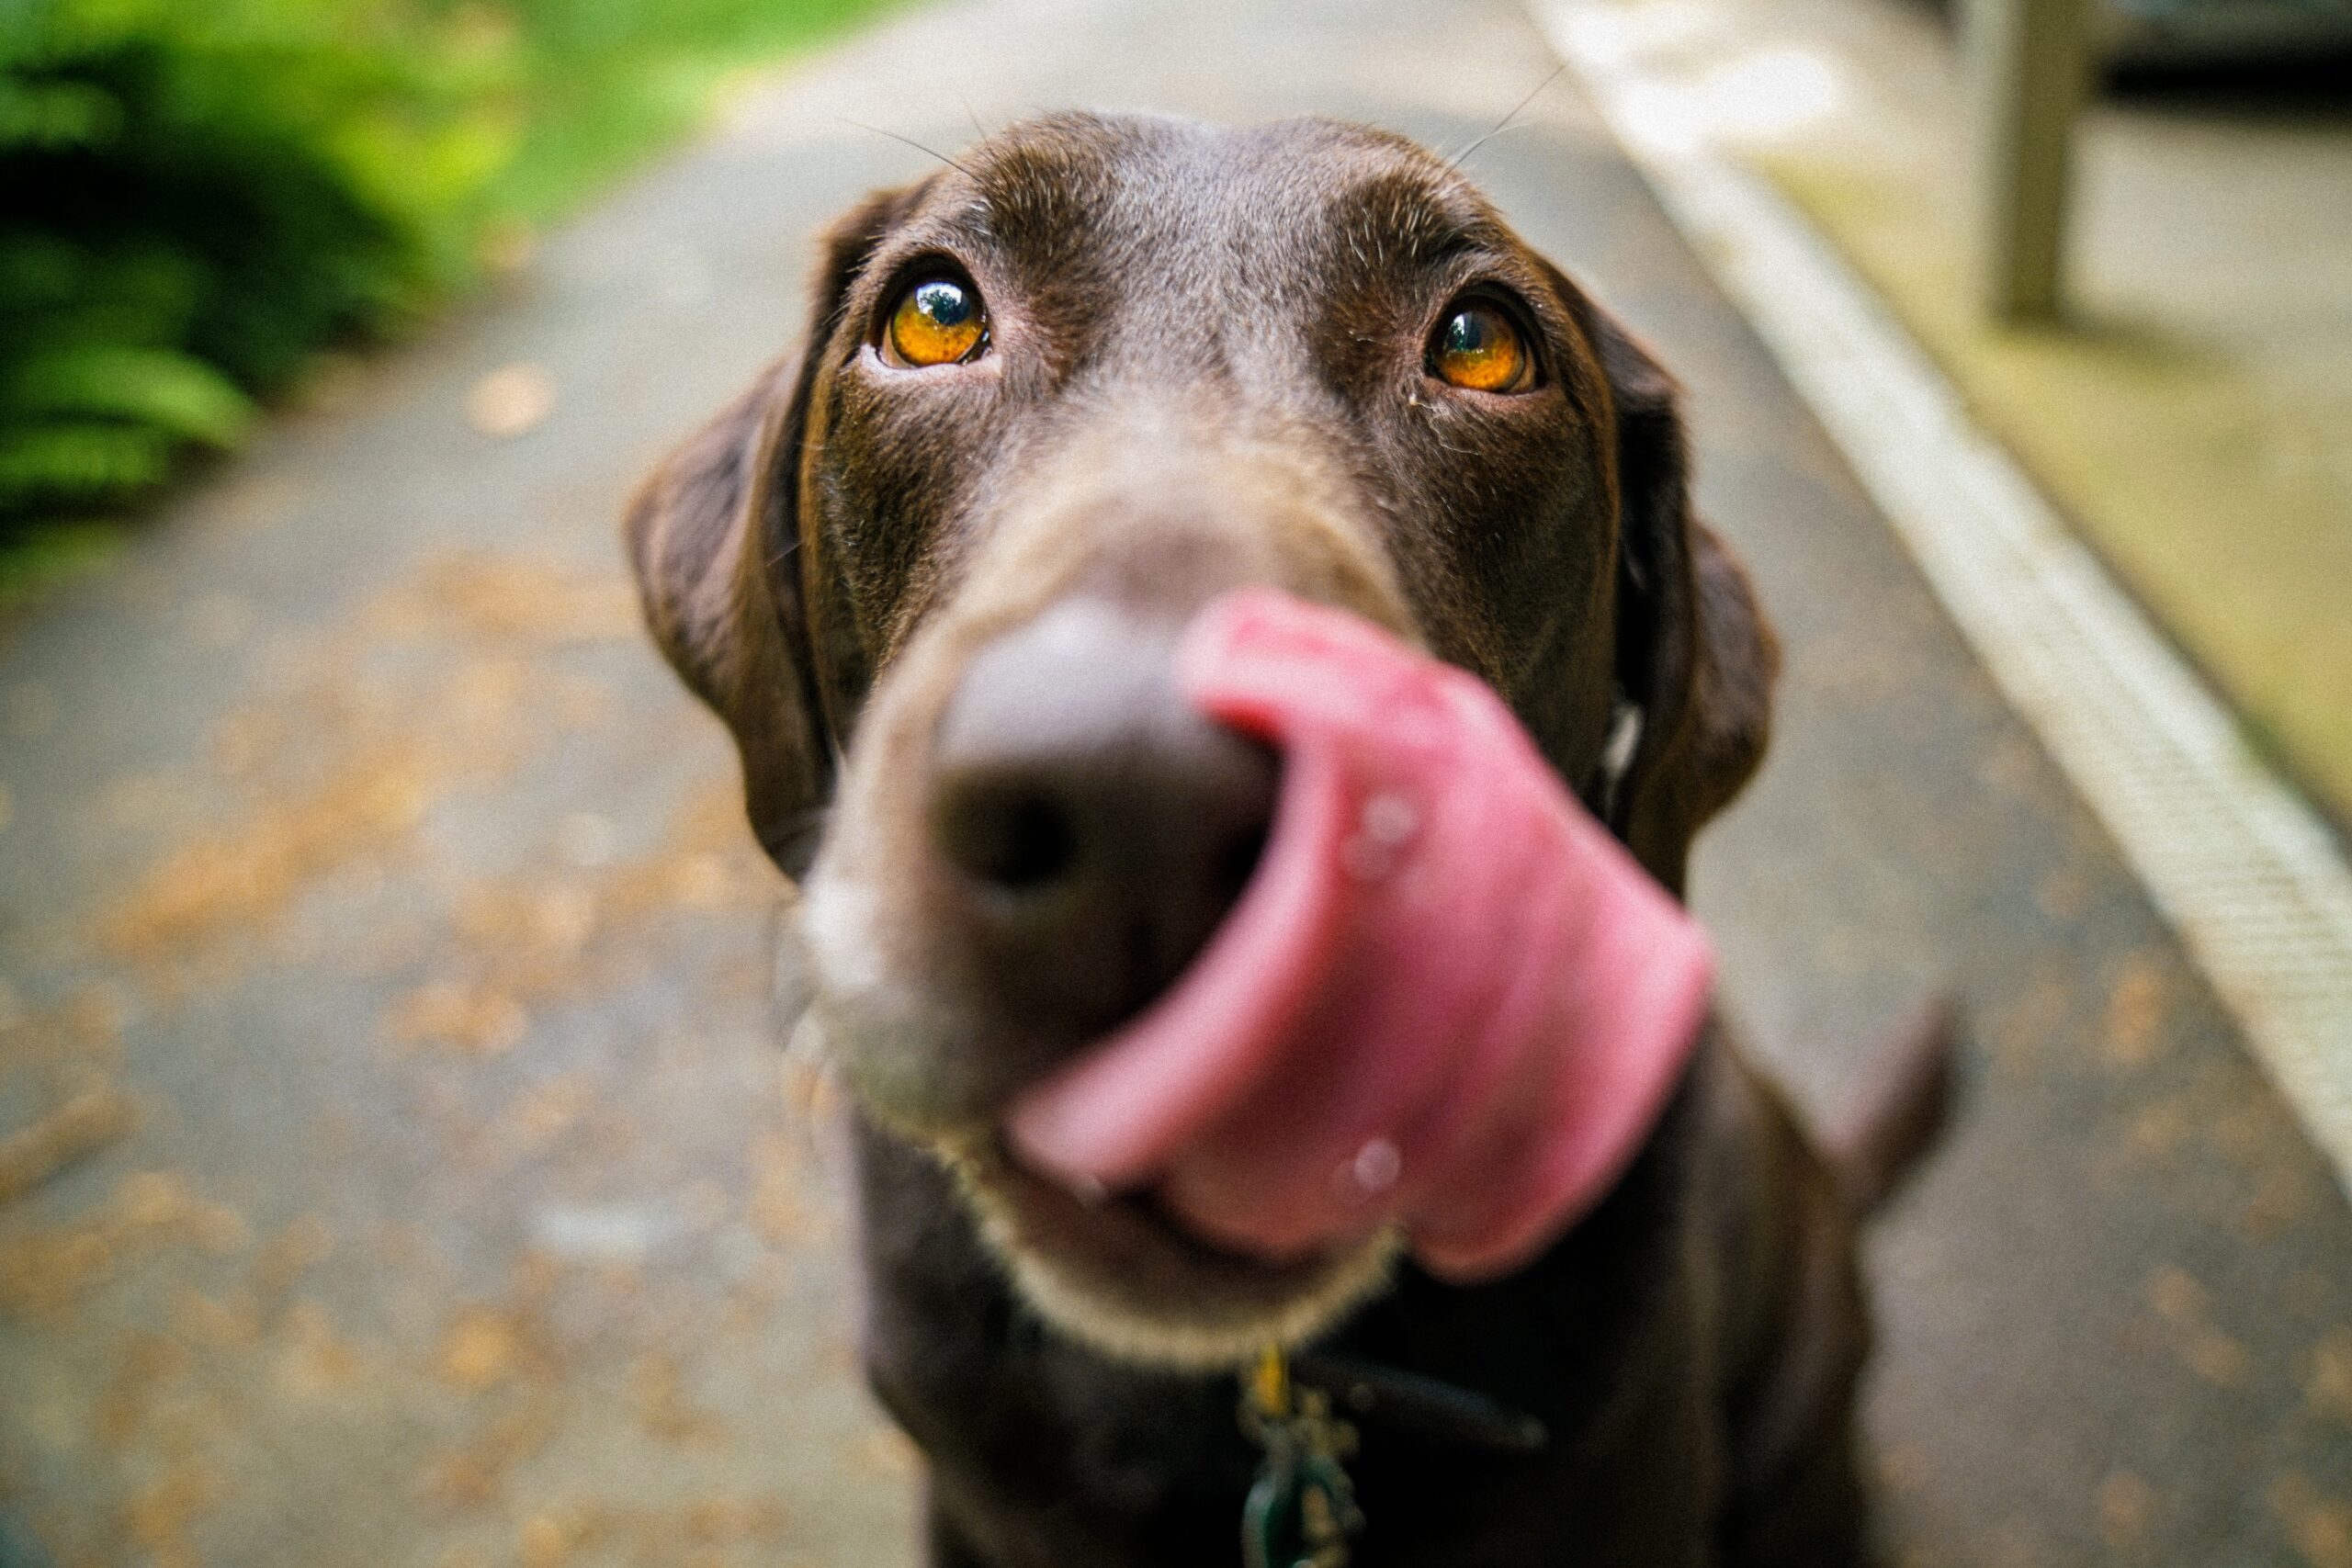 Labrador diet: Human foods that Labs can eat 